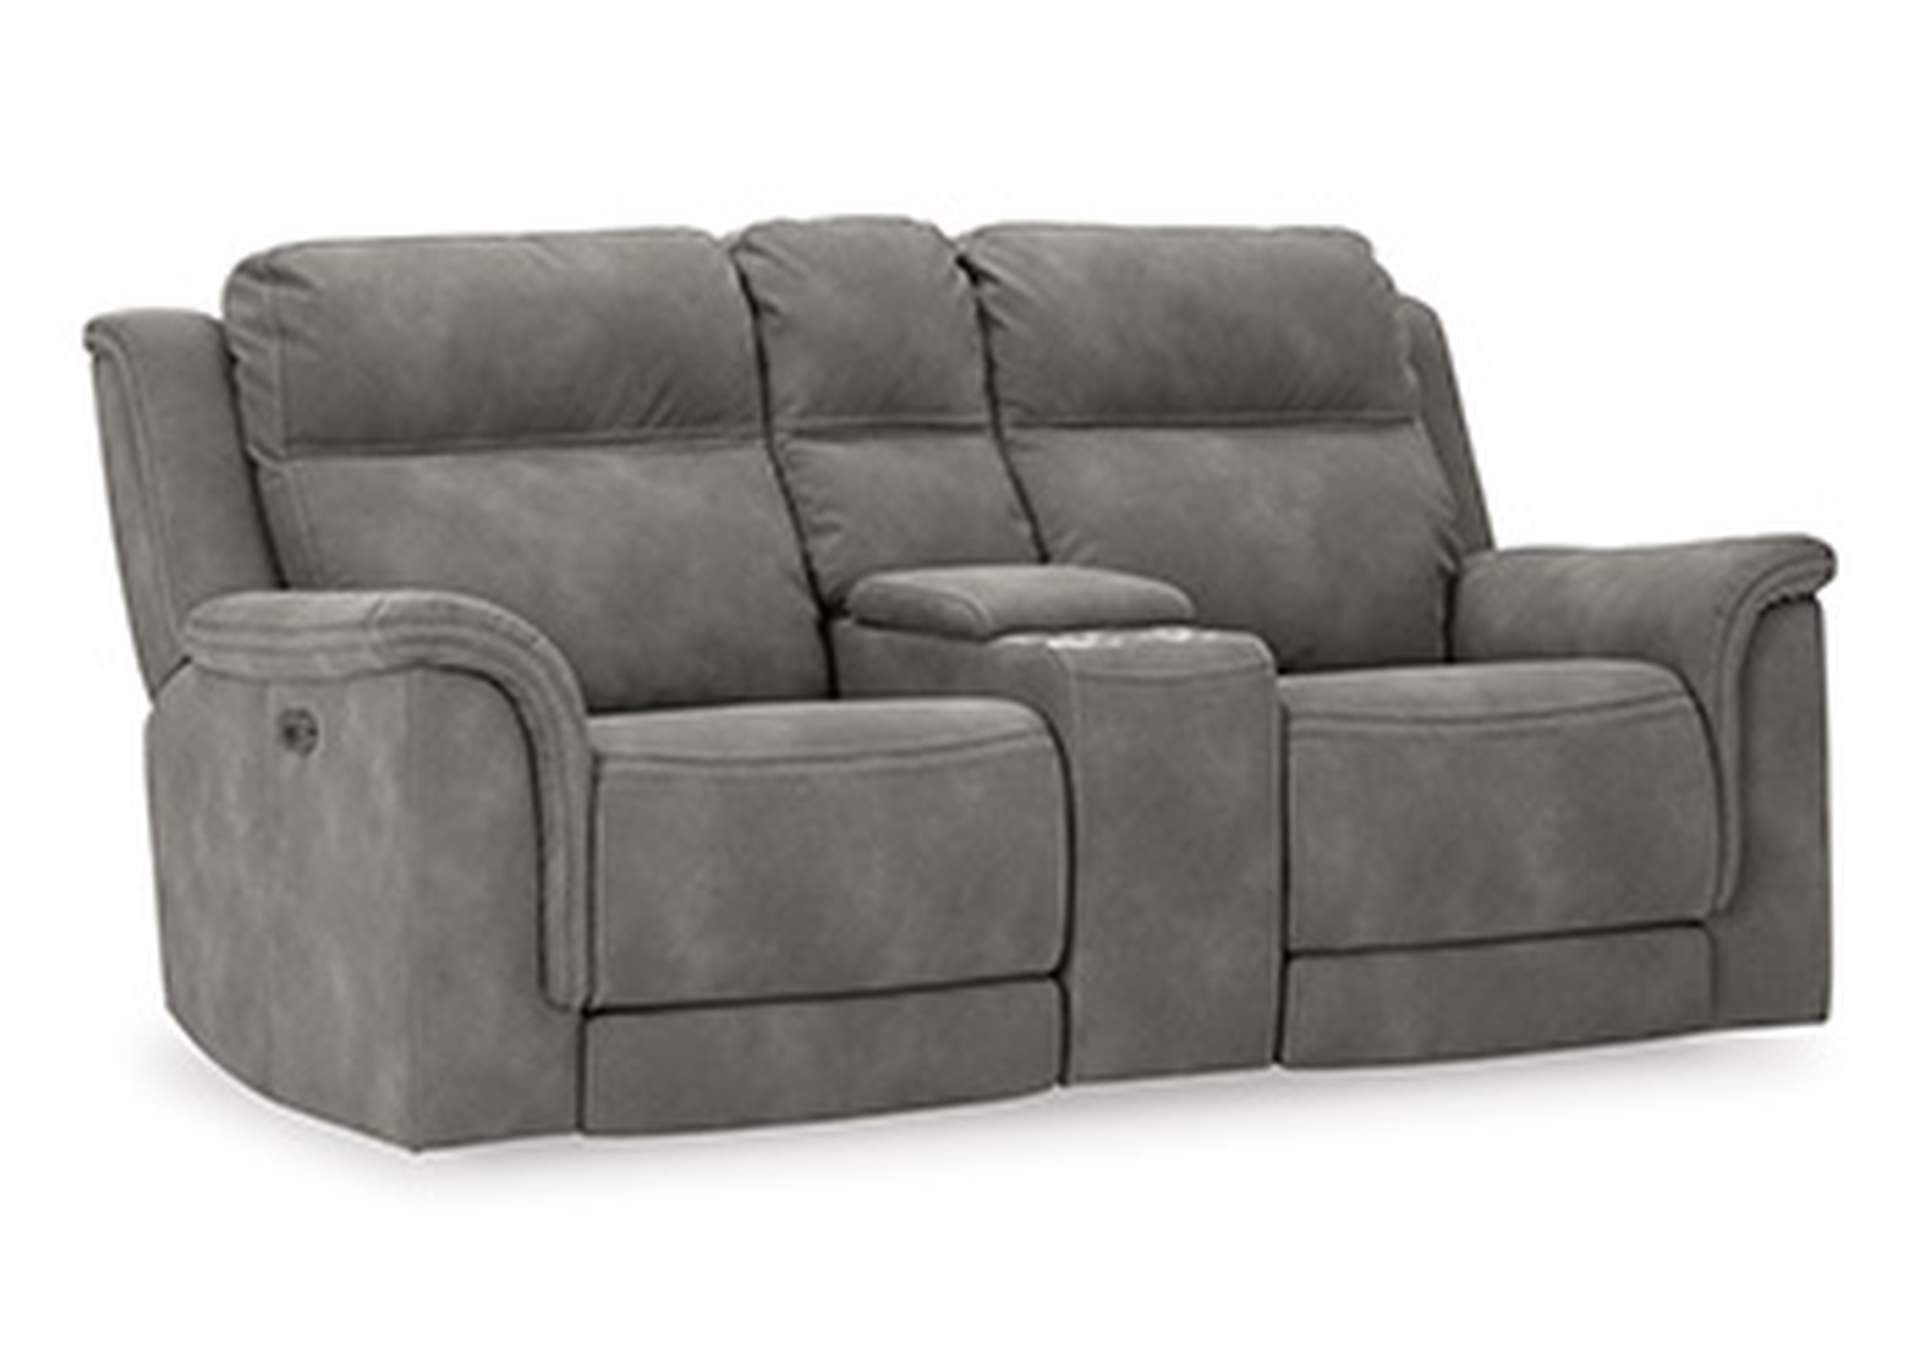 Next-Gen DuraPella 3-Piece Sectional with Recliner,Signature Design By Ashley